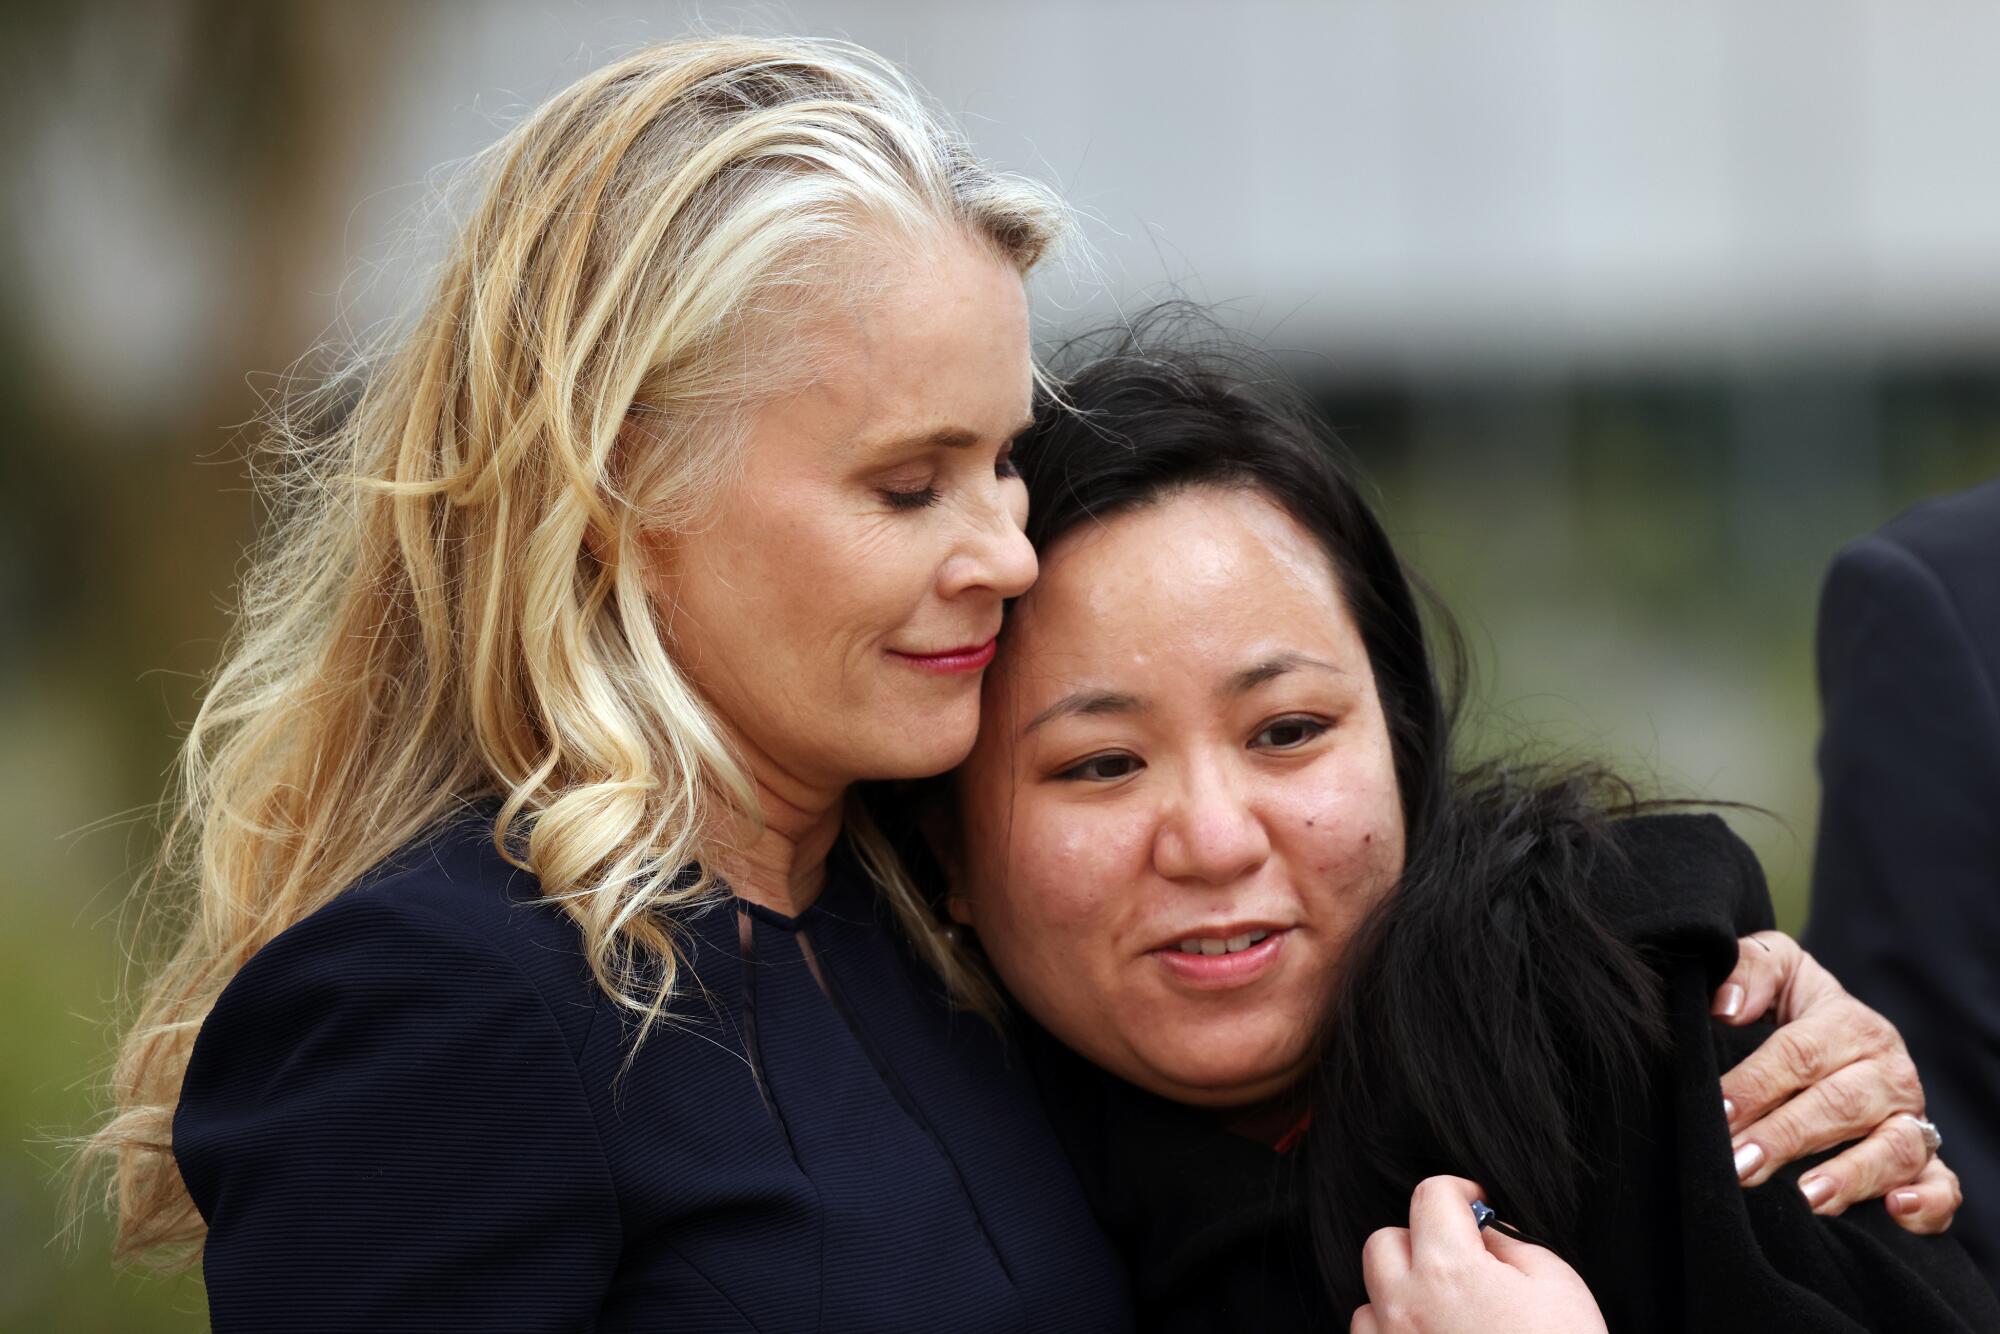 Audry Nafziger, left, hugs Lucy Chi, right, after speaking during a press conference 